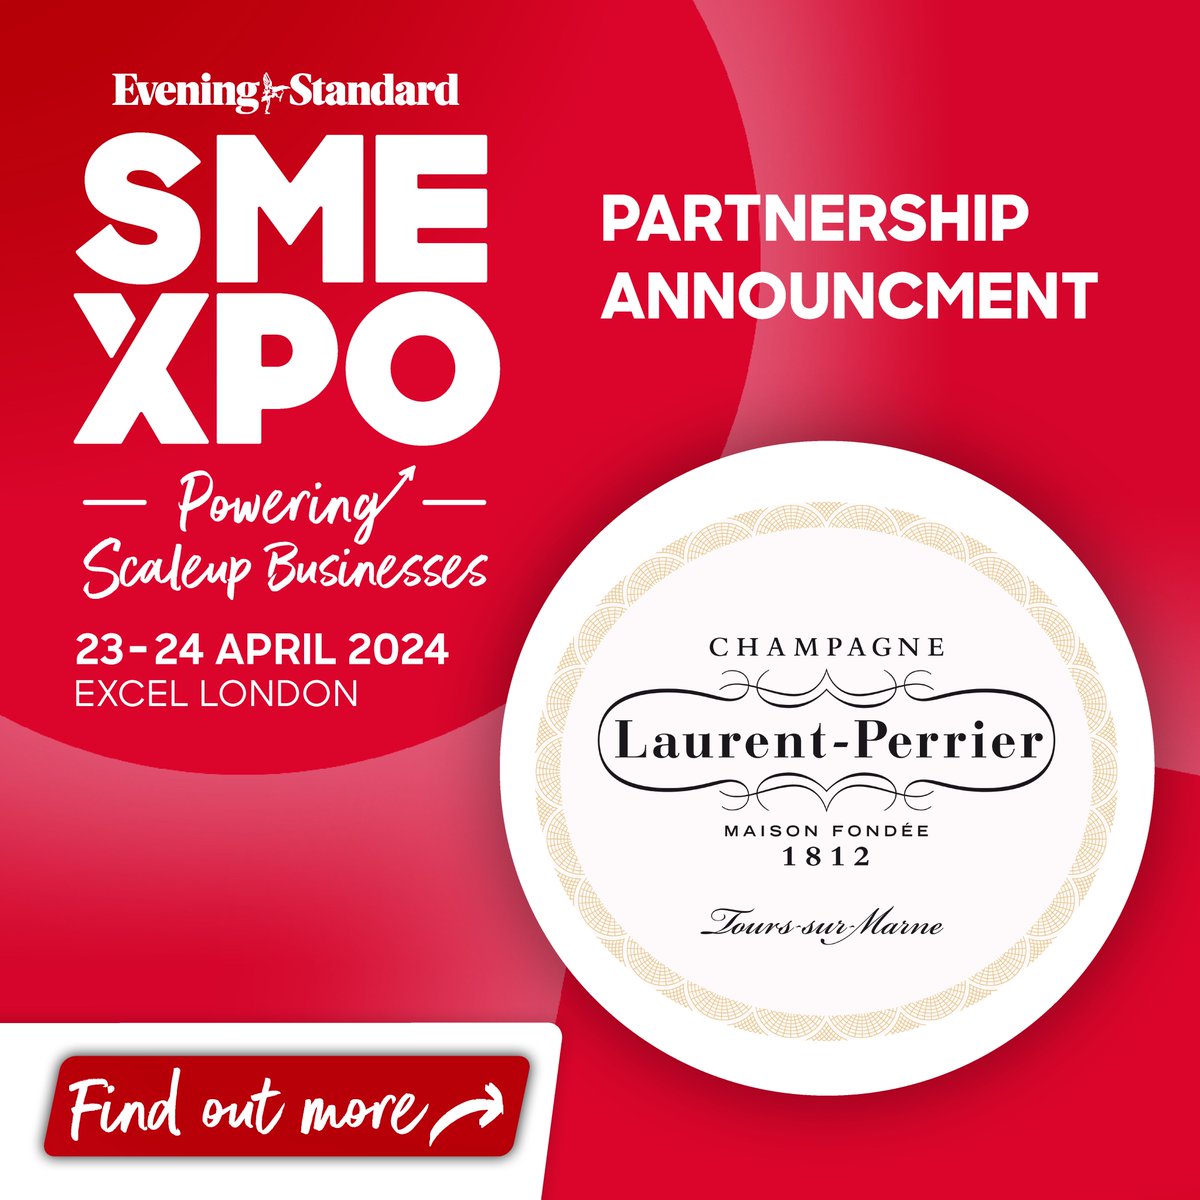 We are proud to partner with Champagne Laurent-Perrier, an independent family House that was built with 4 strong convictions. These 4 convictions make Laurent-Perrier, through its Cuvées. 👉 Claim your free ticket here: sme-xpo-2024.reg.buzz/socialmedia #SMEXPO2024 #Partnerannouncement